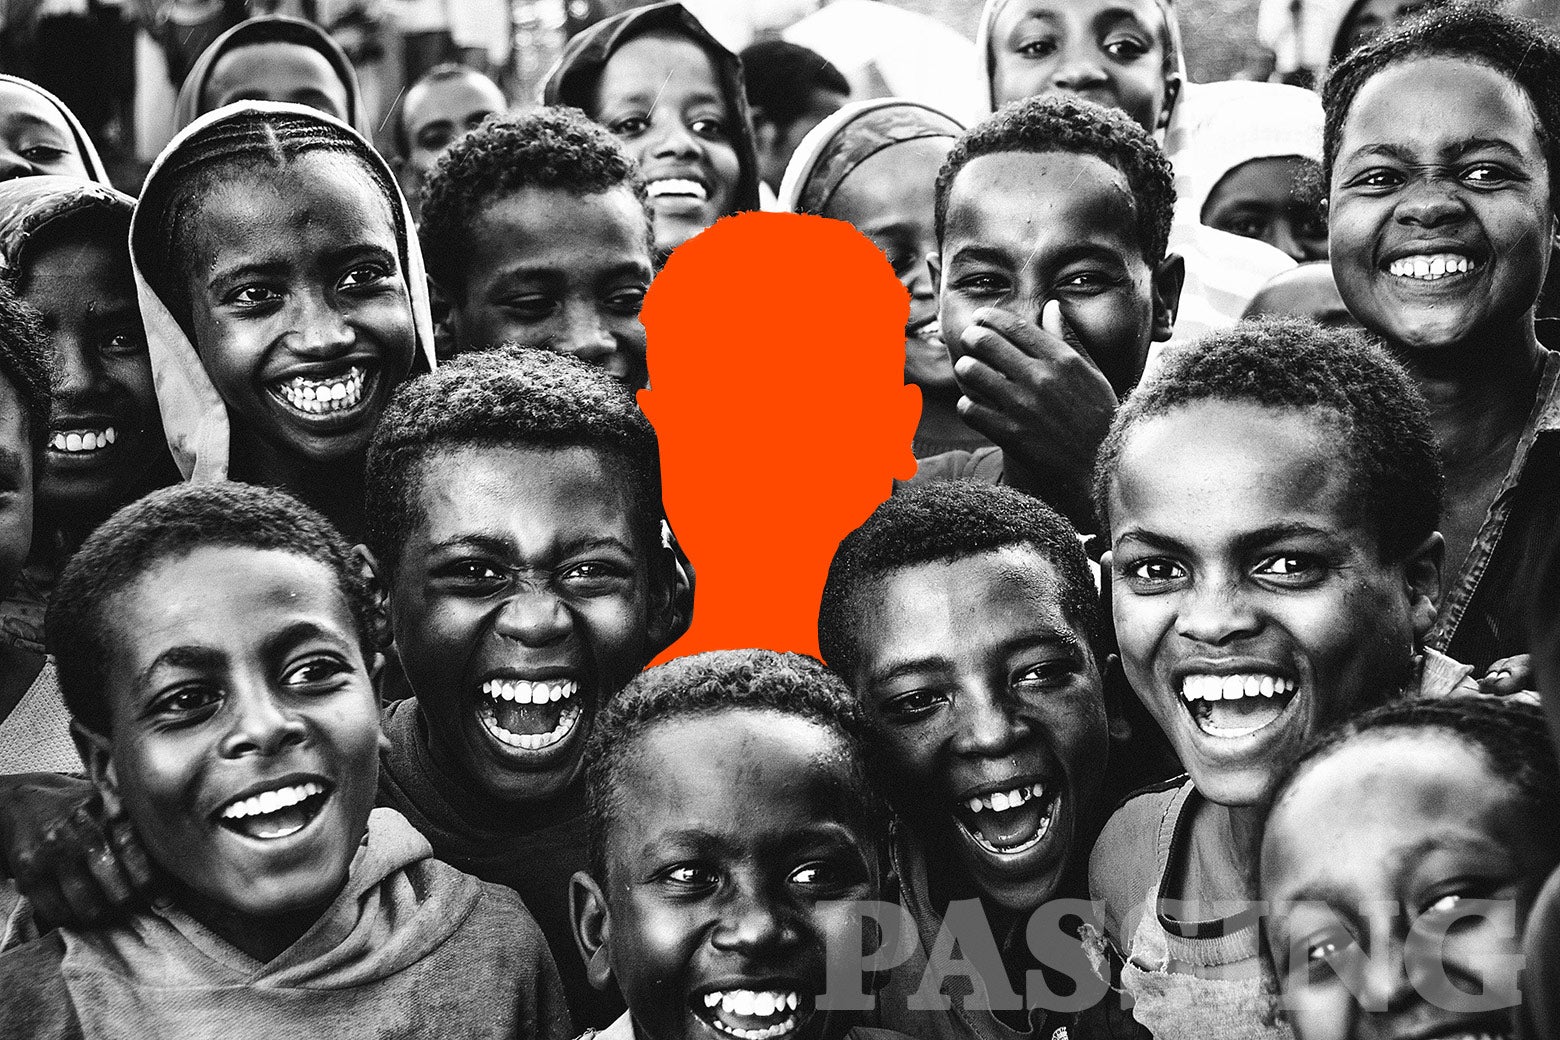 An orange silhouette of a person in a crowd of Africans.